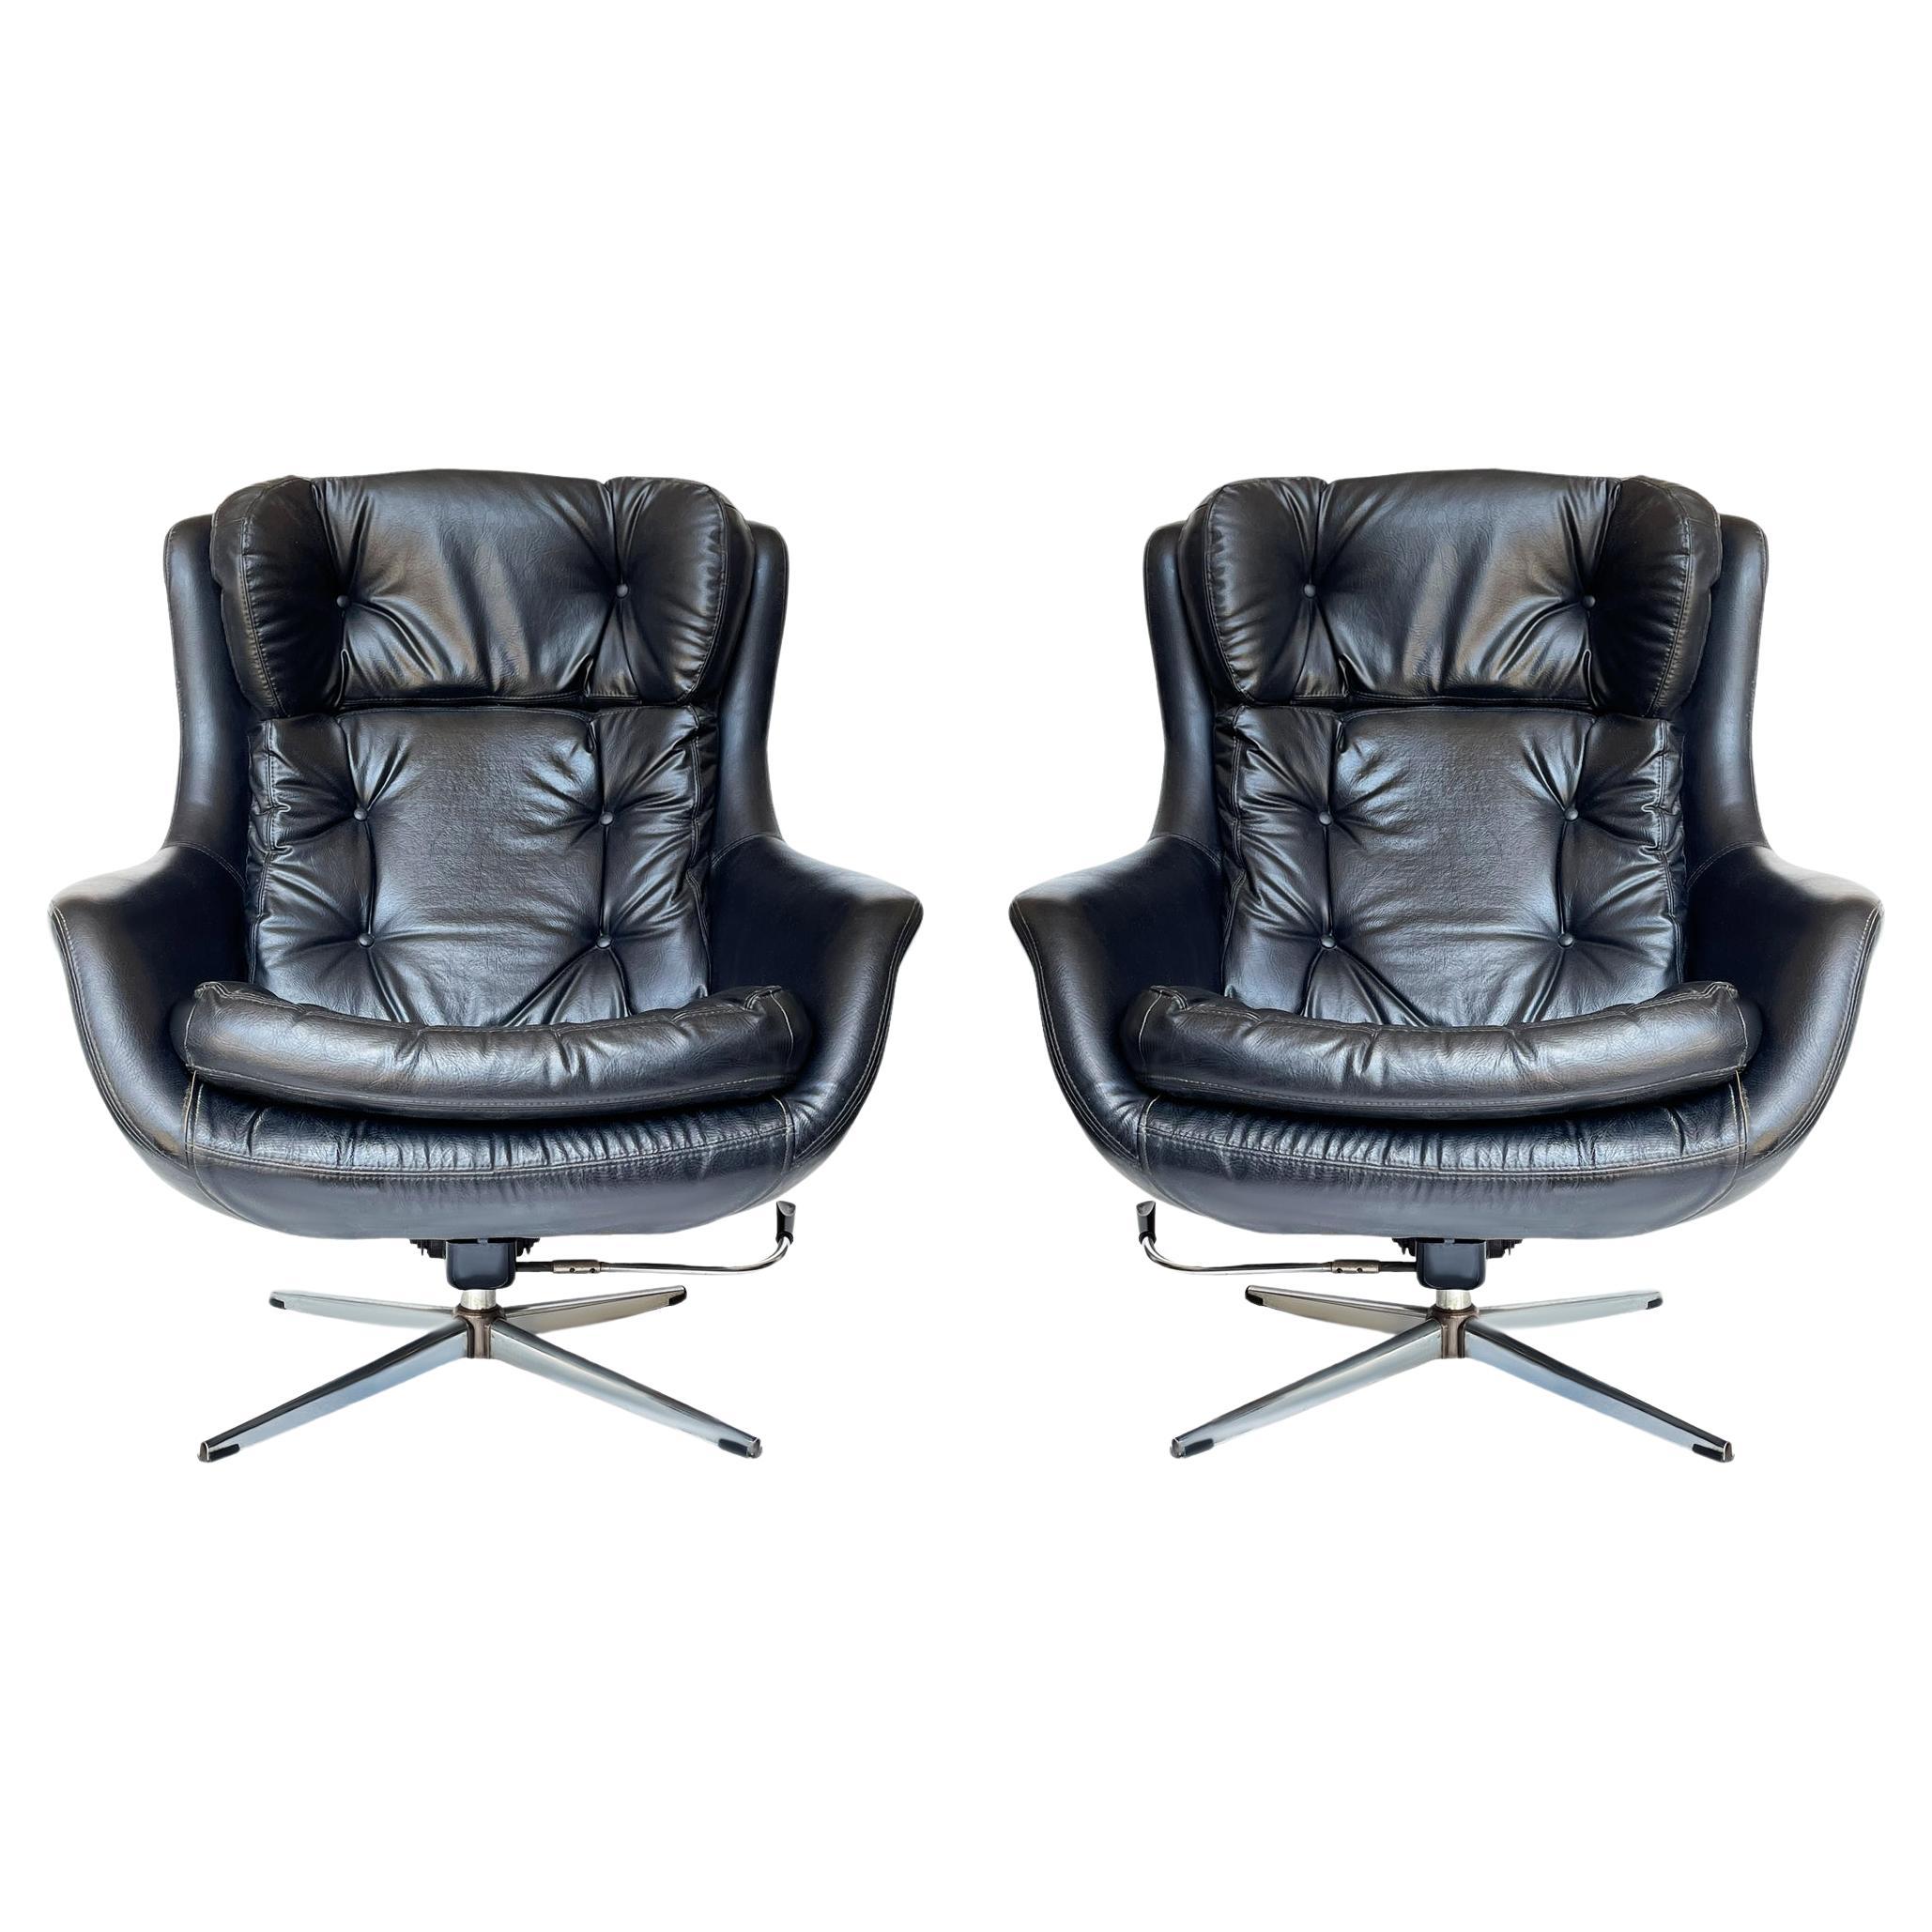 Pair of Mid Century Modern Black Swivel Lounge Chairs by Overman Sweden 